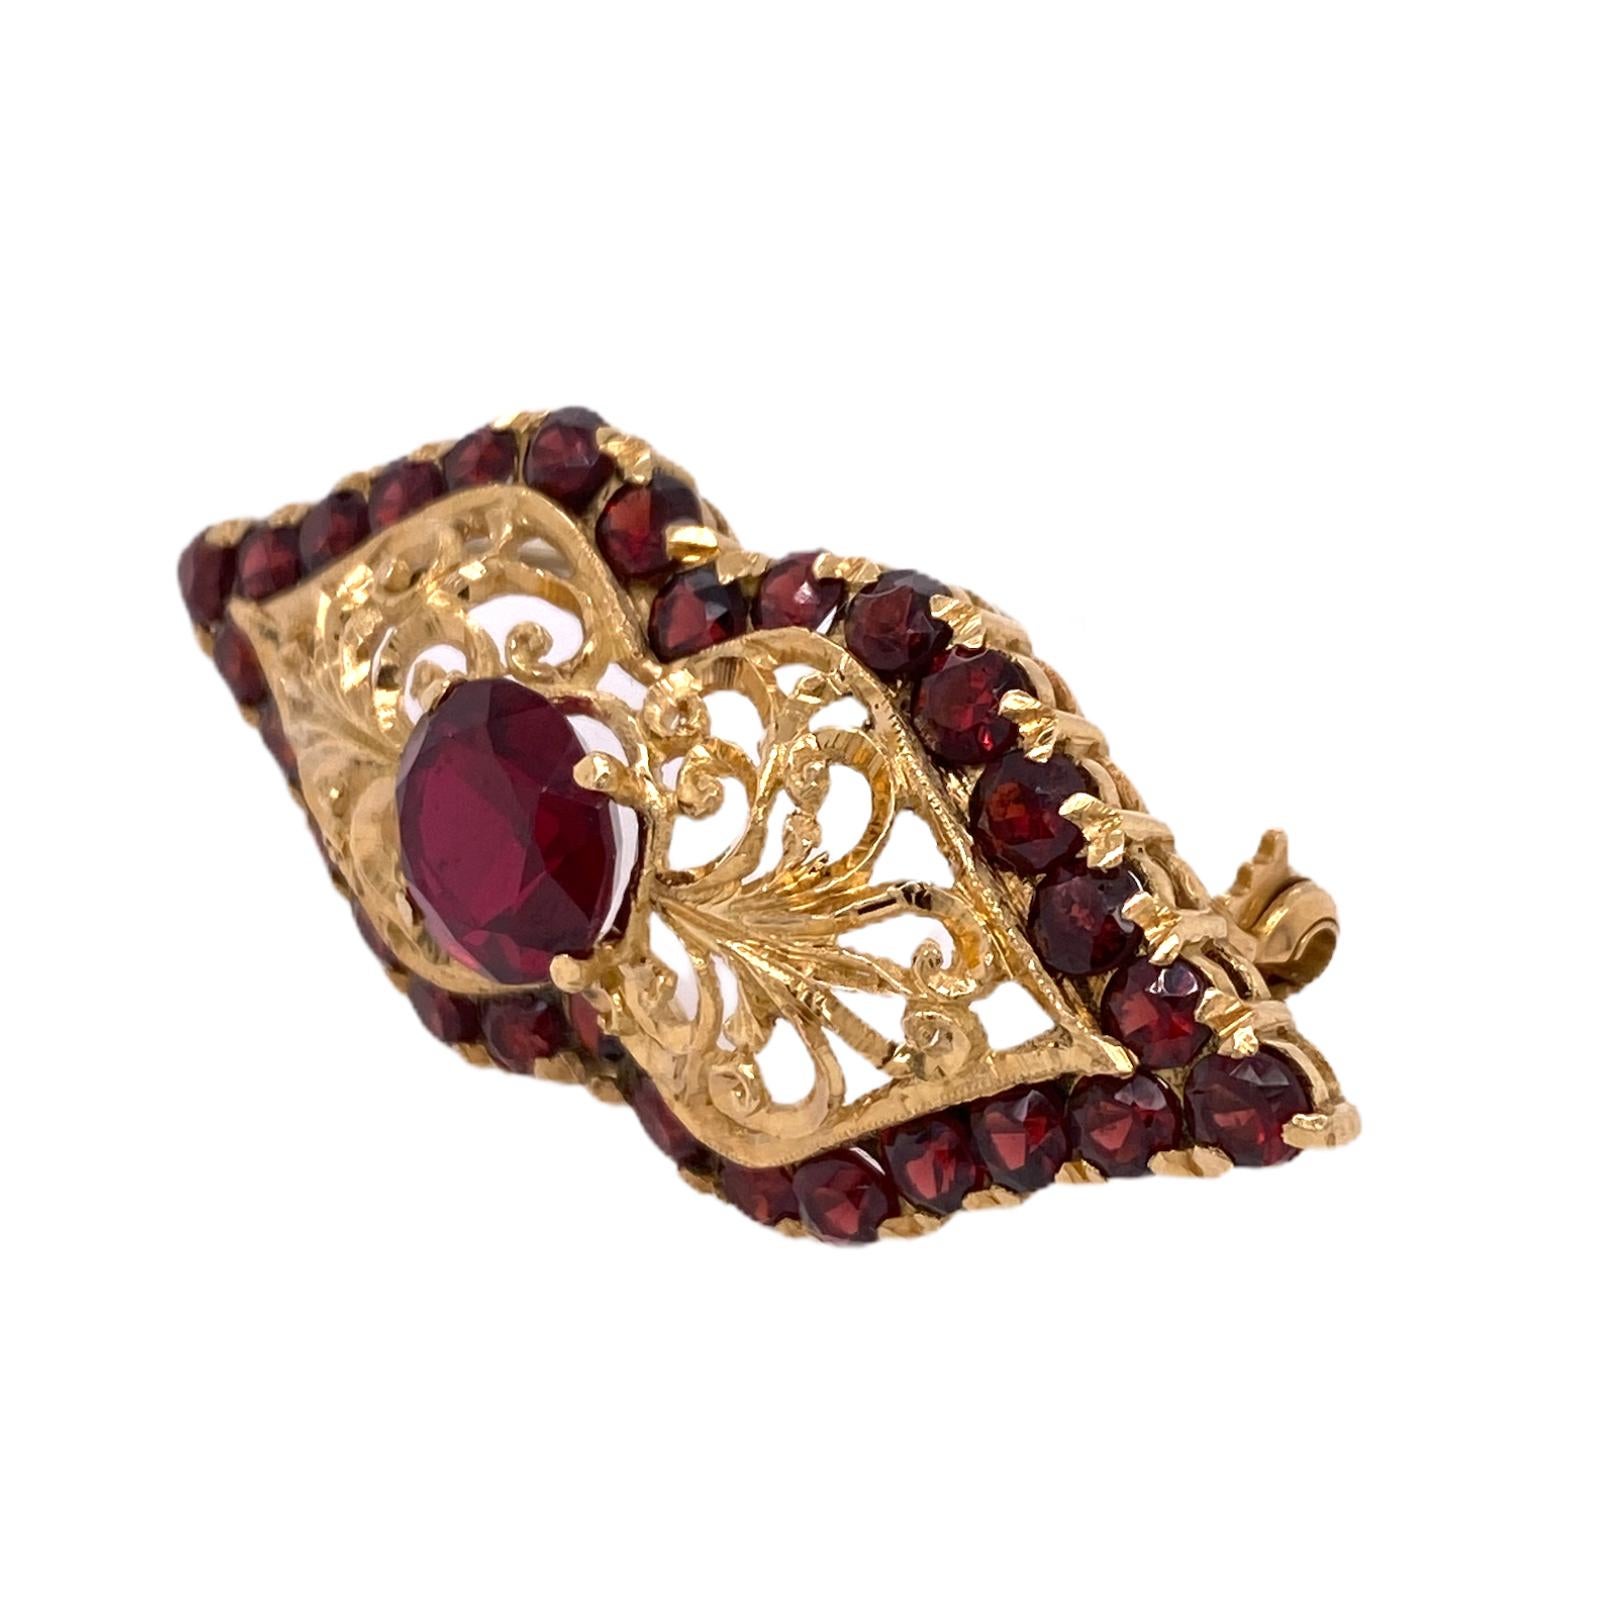 Beautiful Victorian brooch hand crafted in 18 karat yellow gold. The antique pin features red garnet gemstones and hand carved open gold design. Measures 20 x 50mm. 